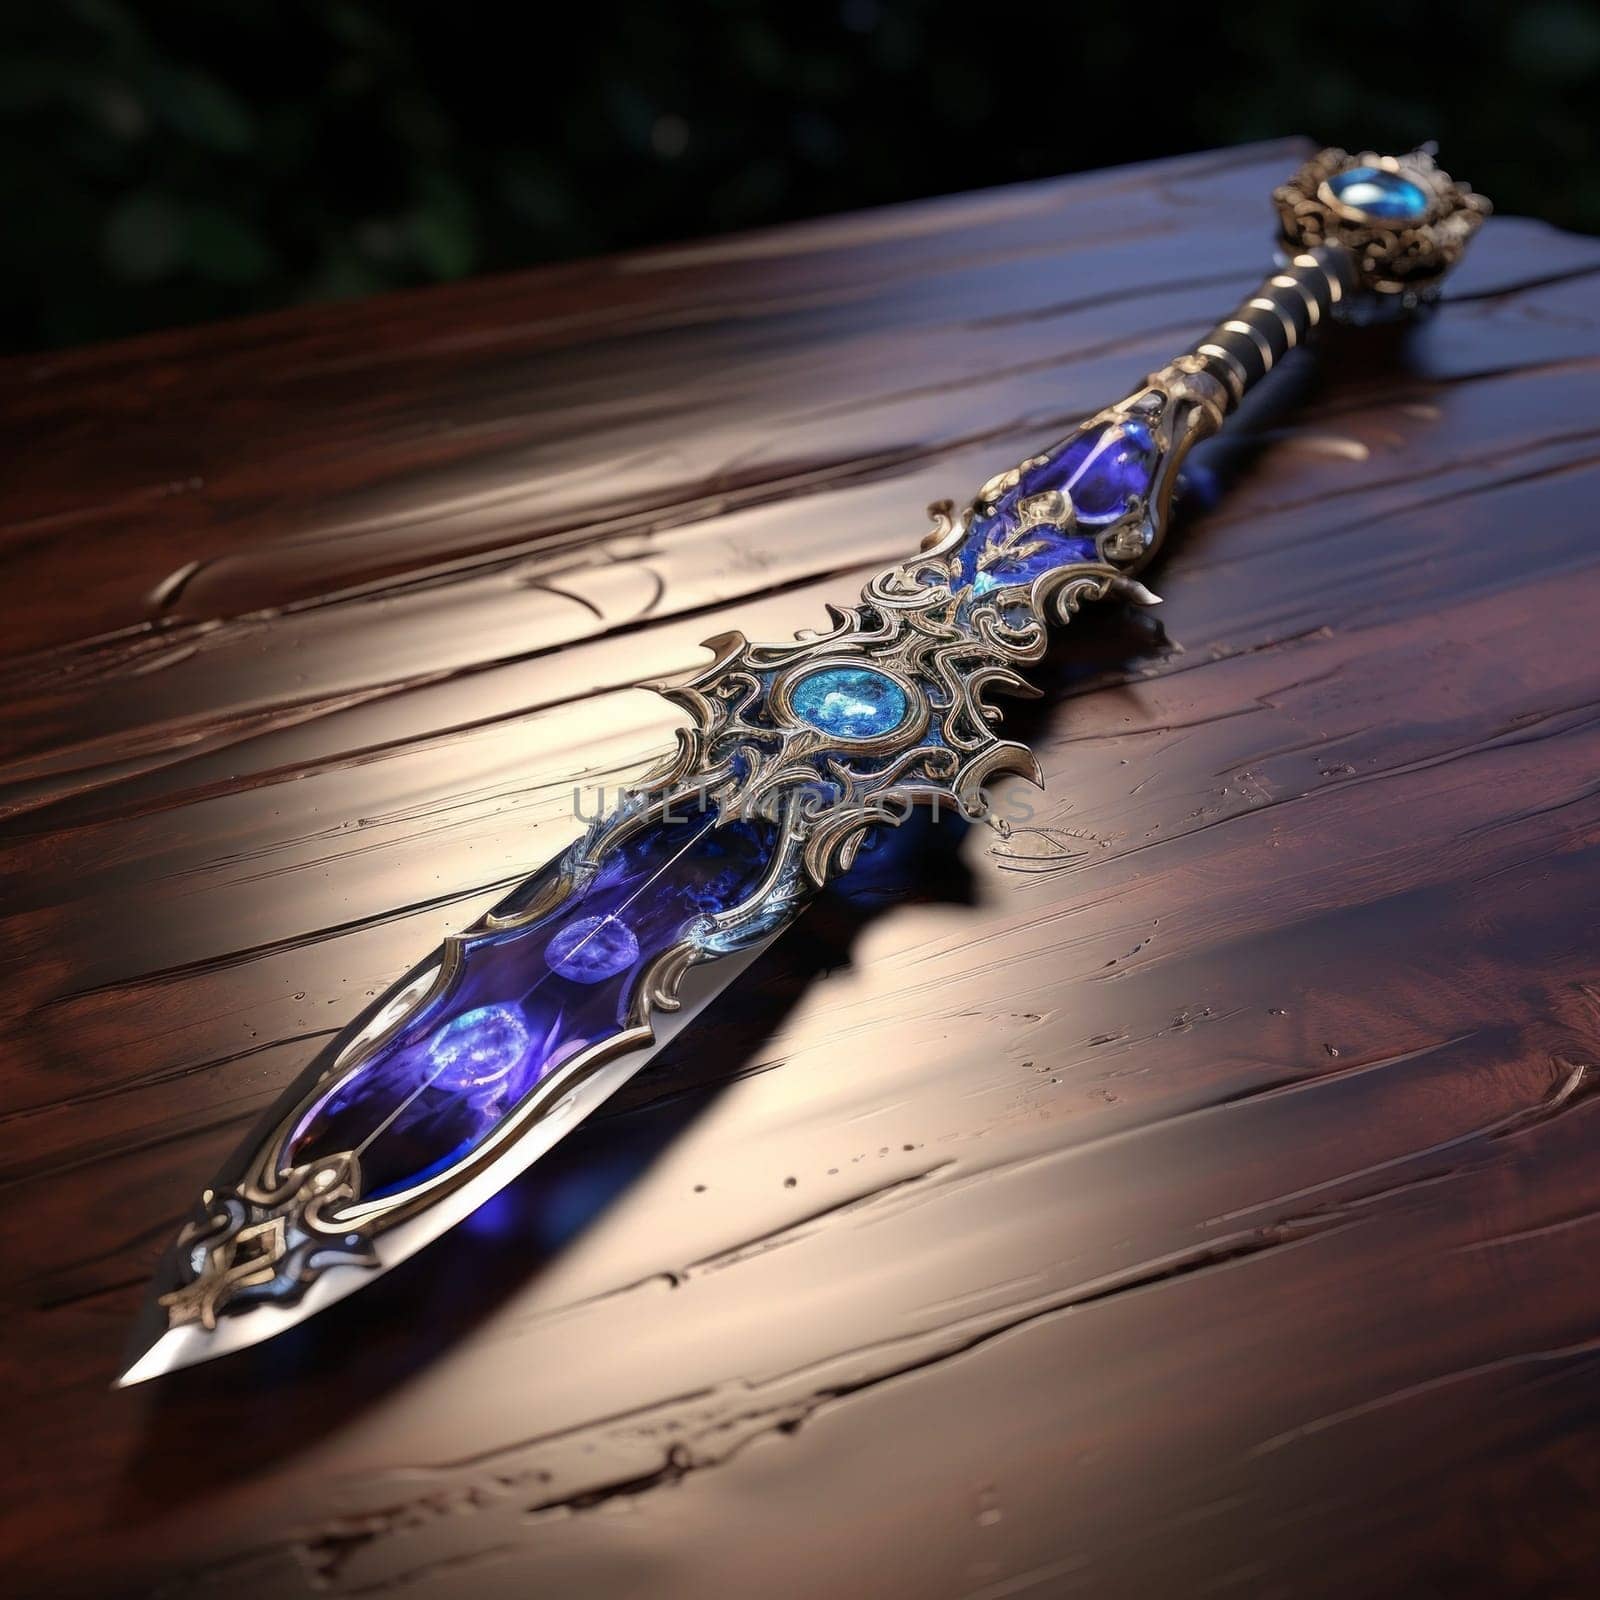 Magical Sword 3D Illustration. Mystical Graphic Asset isolated. Ai generated